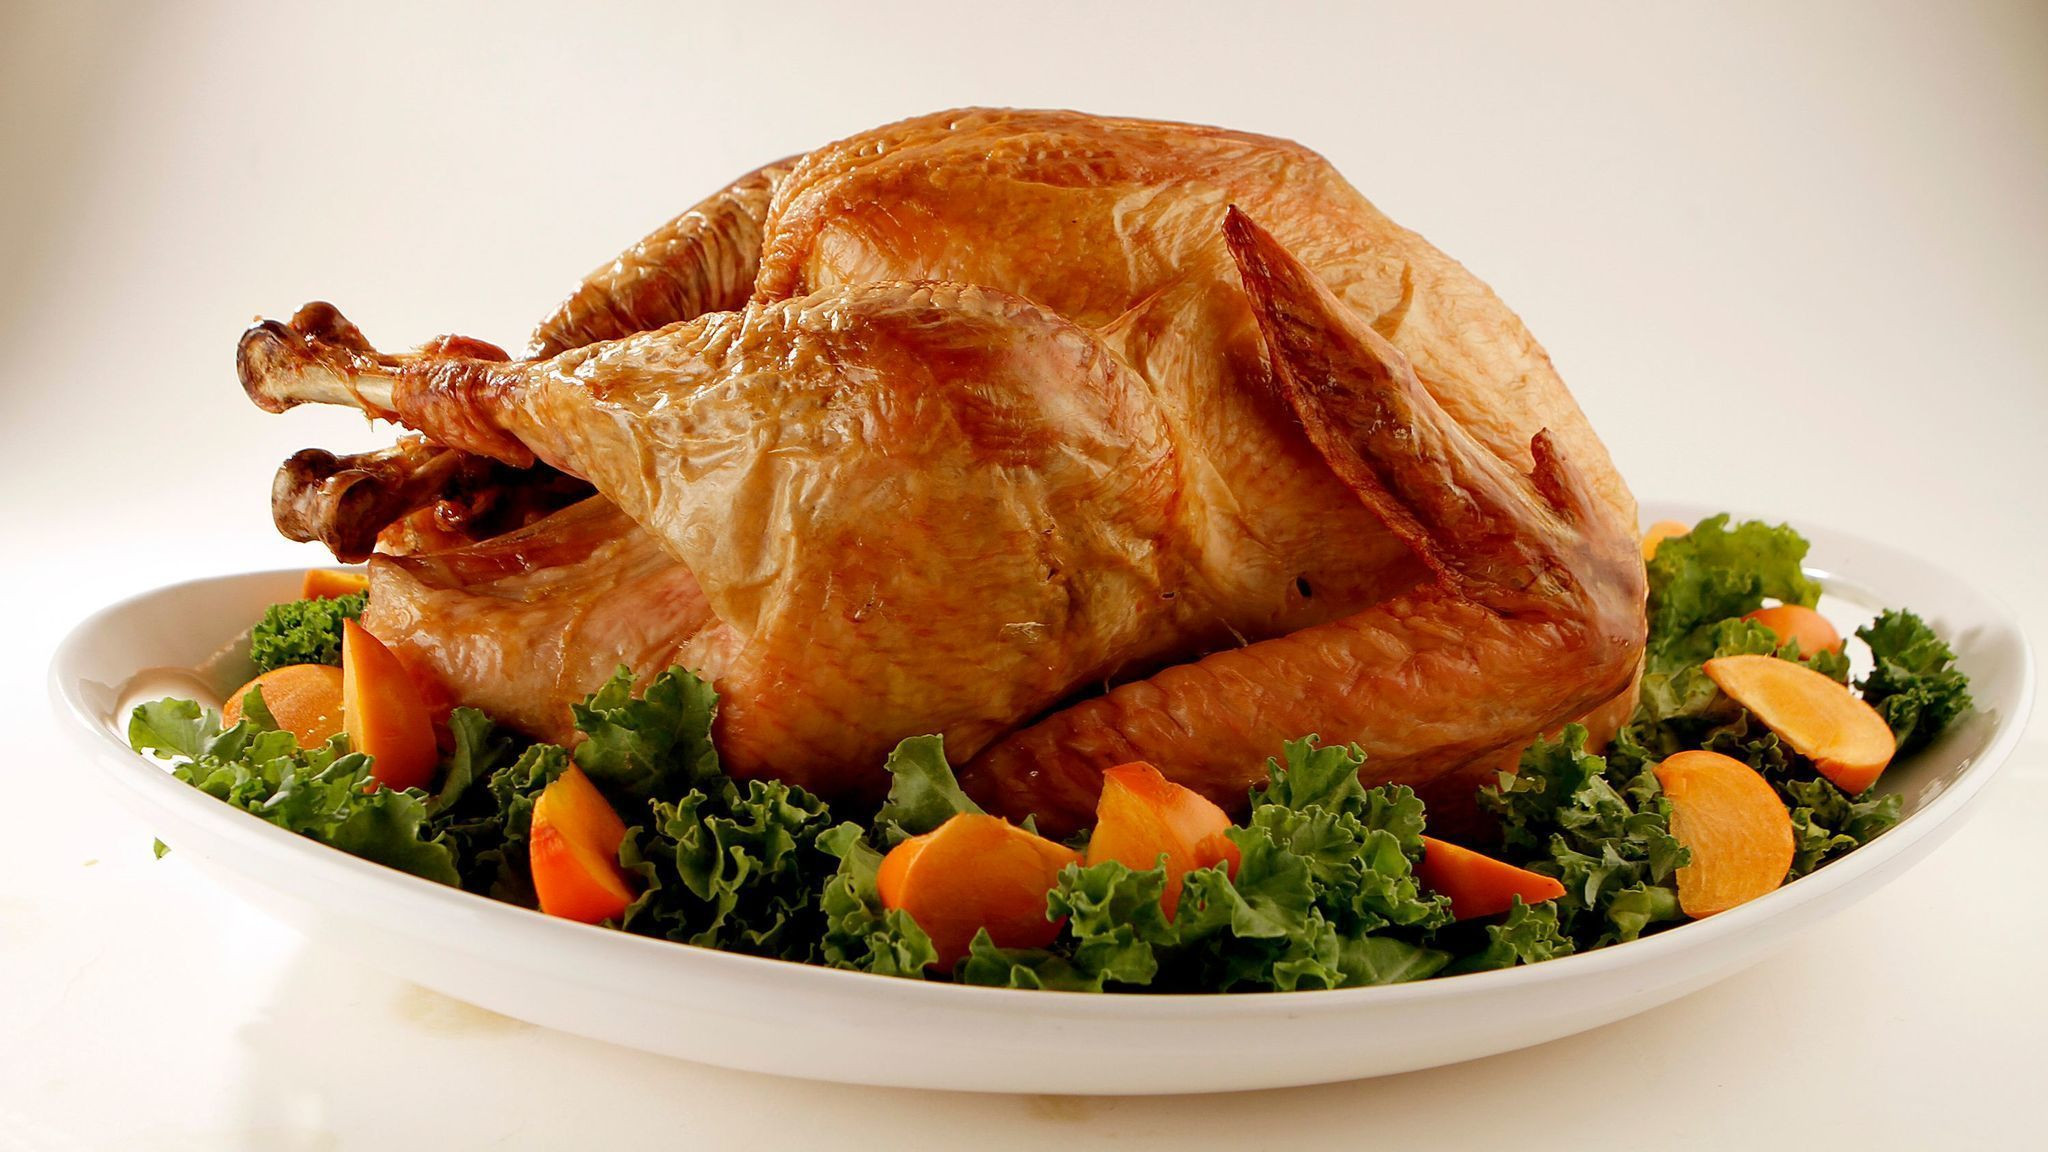 Photos Of Thanksgiving Turkey
 A beginner s guide to cooking a Thanksgiving turkey LA Times